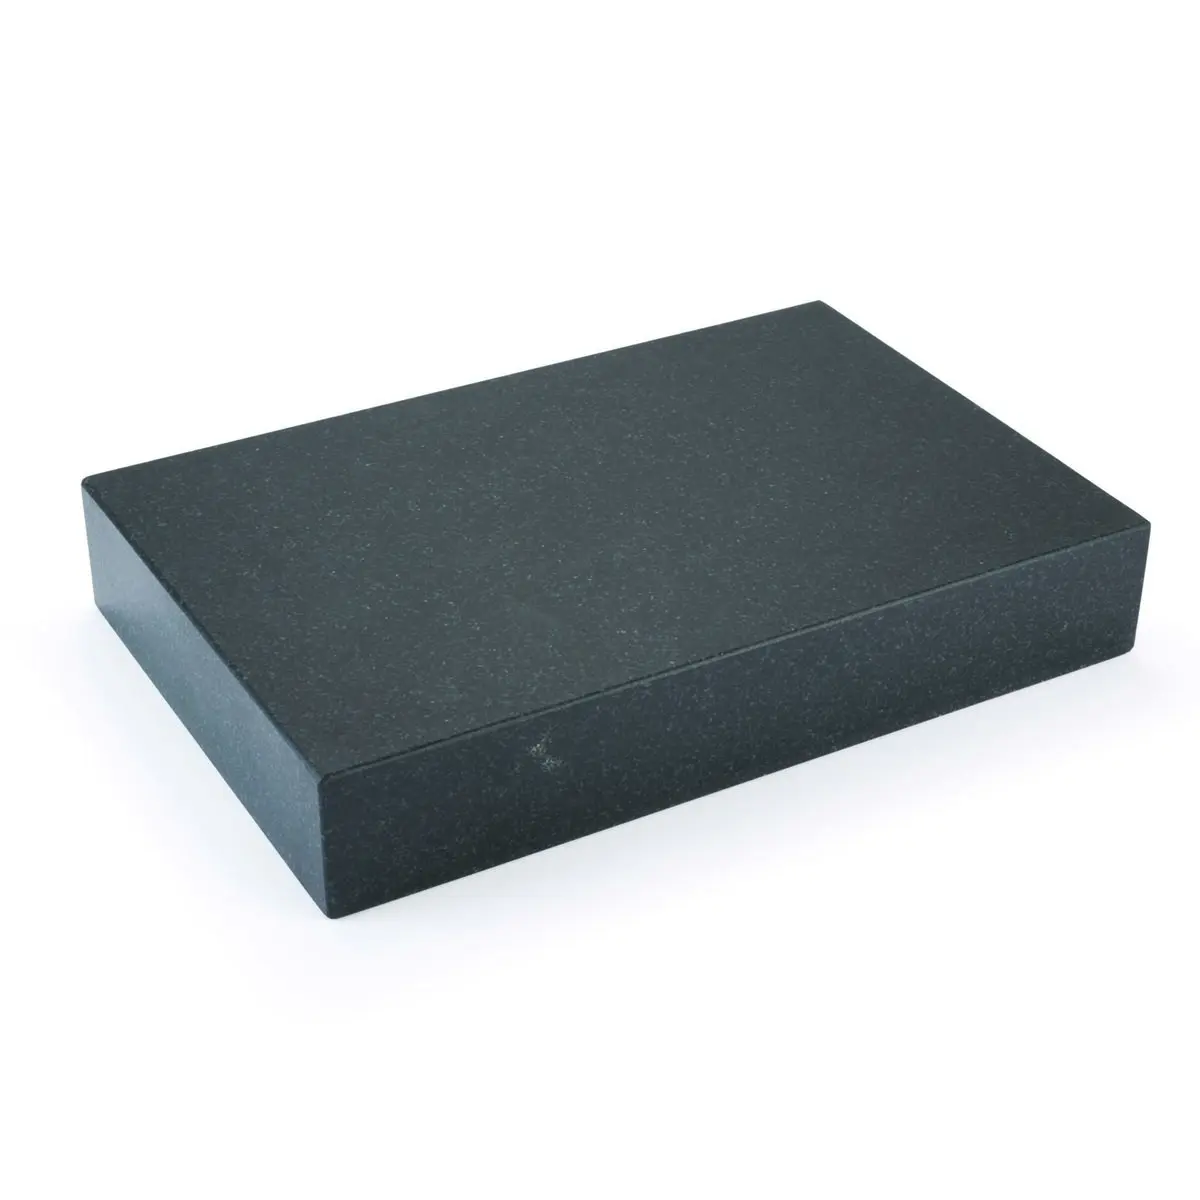 High precision black granite surface flatness measuring inspection plate 500*600*70mm with stand